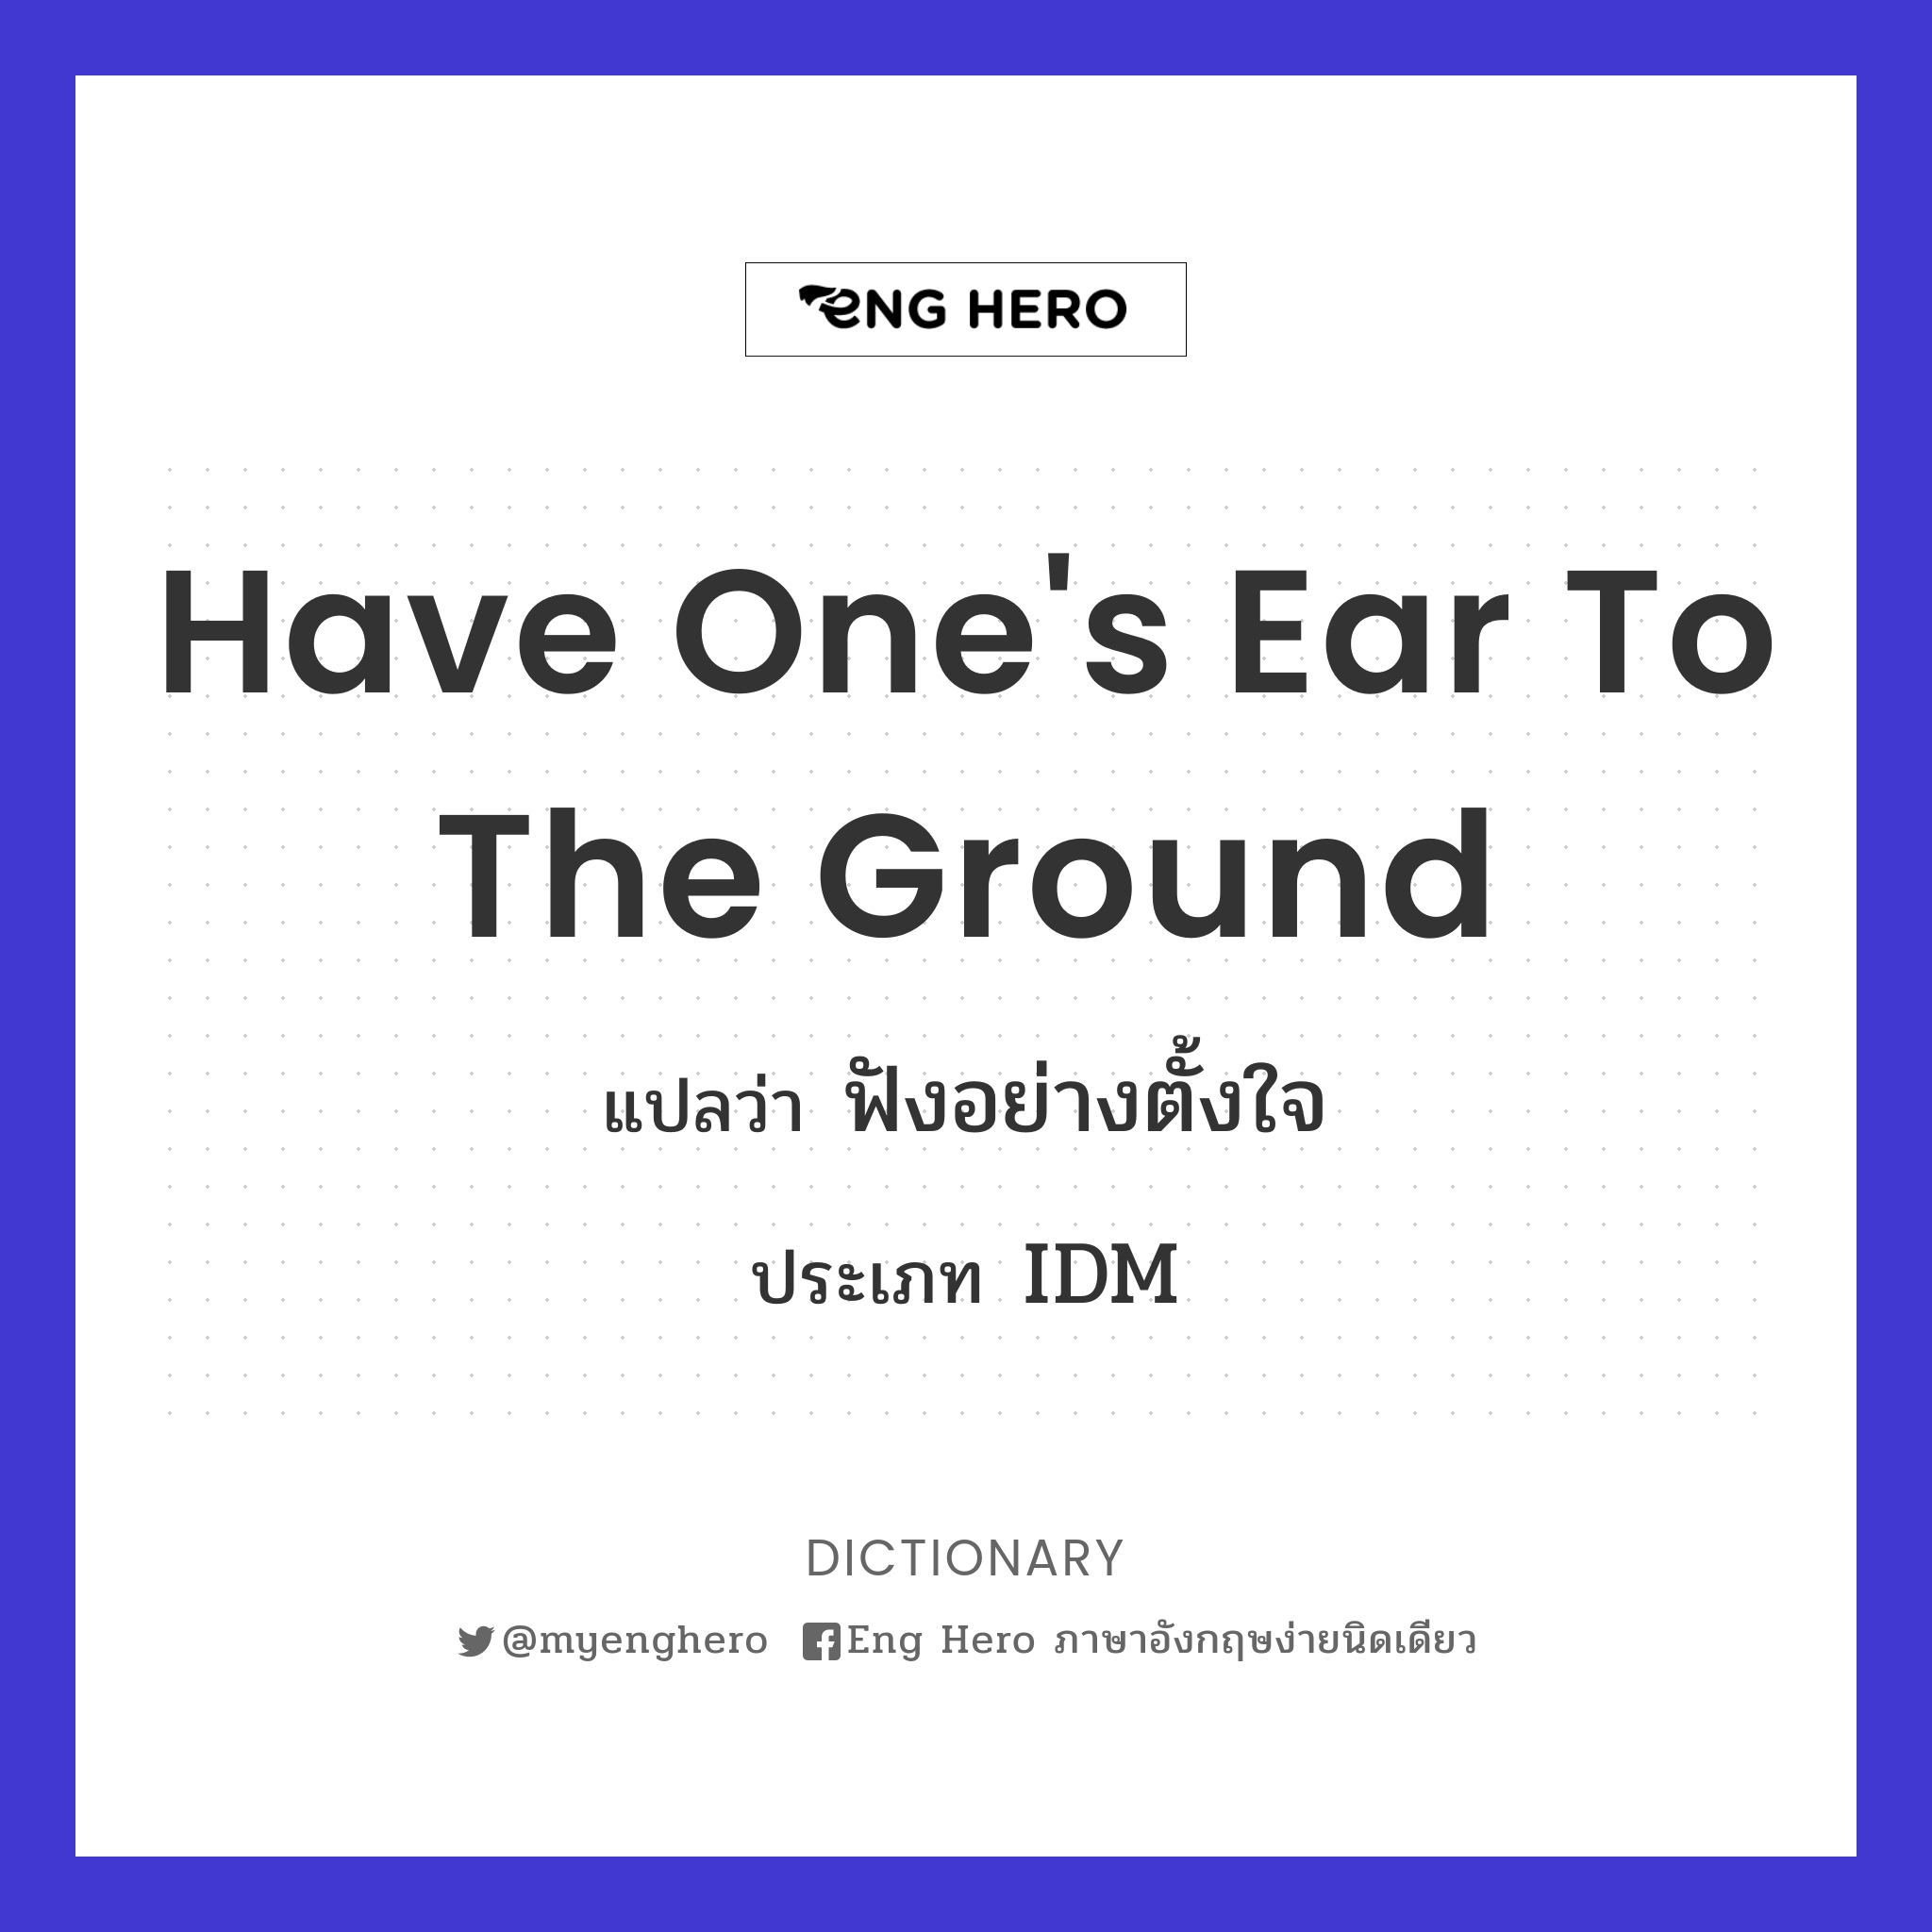 have one's ear to the ground